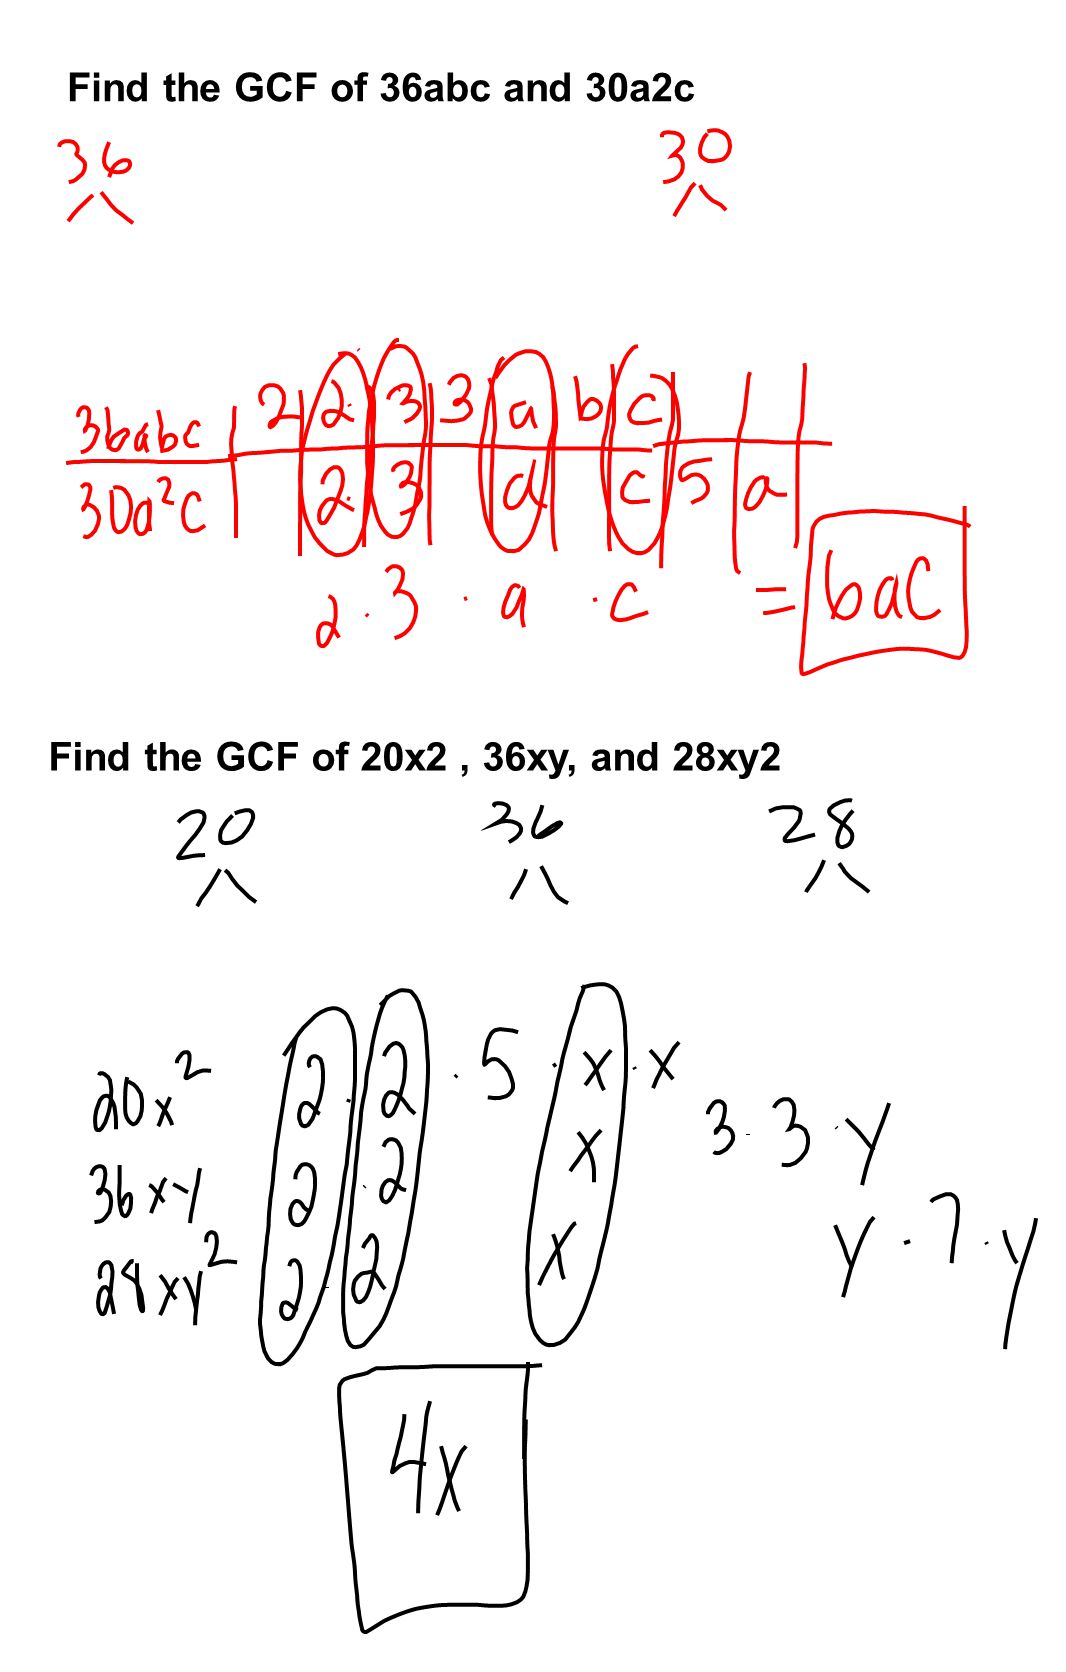 Find the GCF of 36abc and 30a2c Find the GCF of 20x2, 36xy, and 28xy2